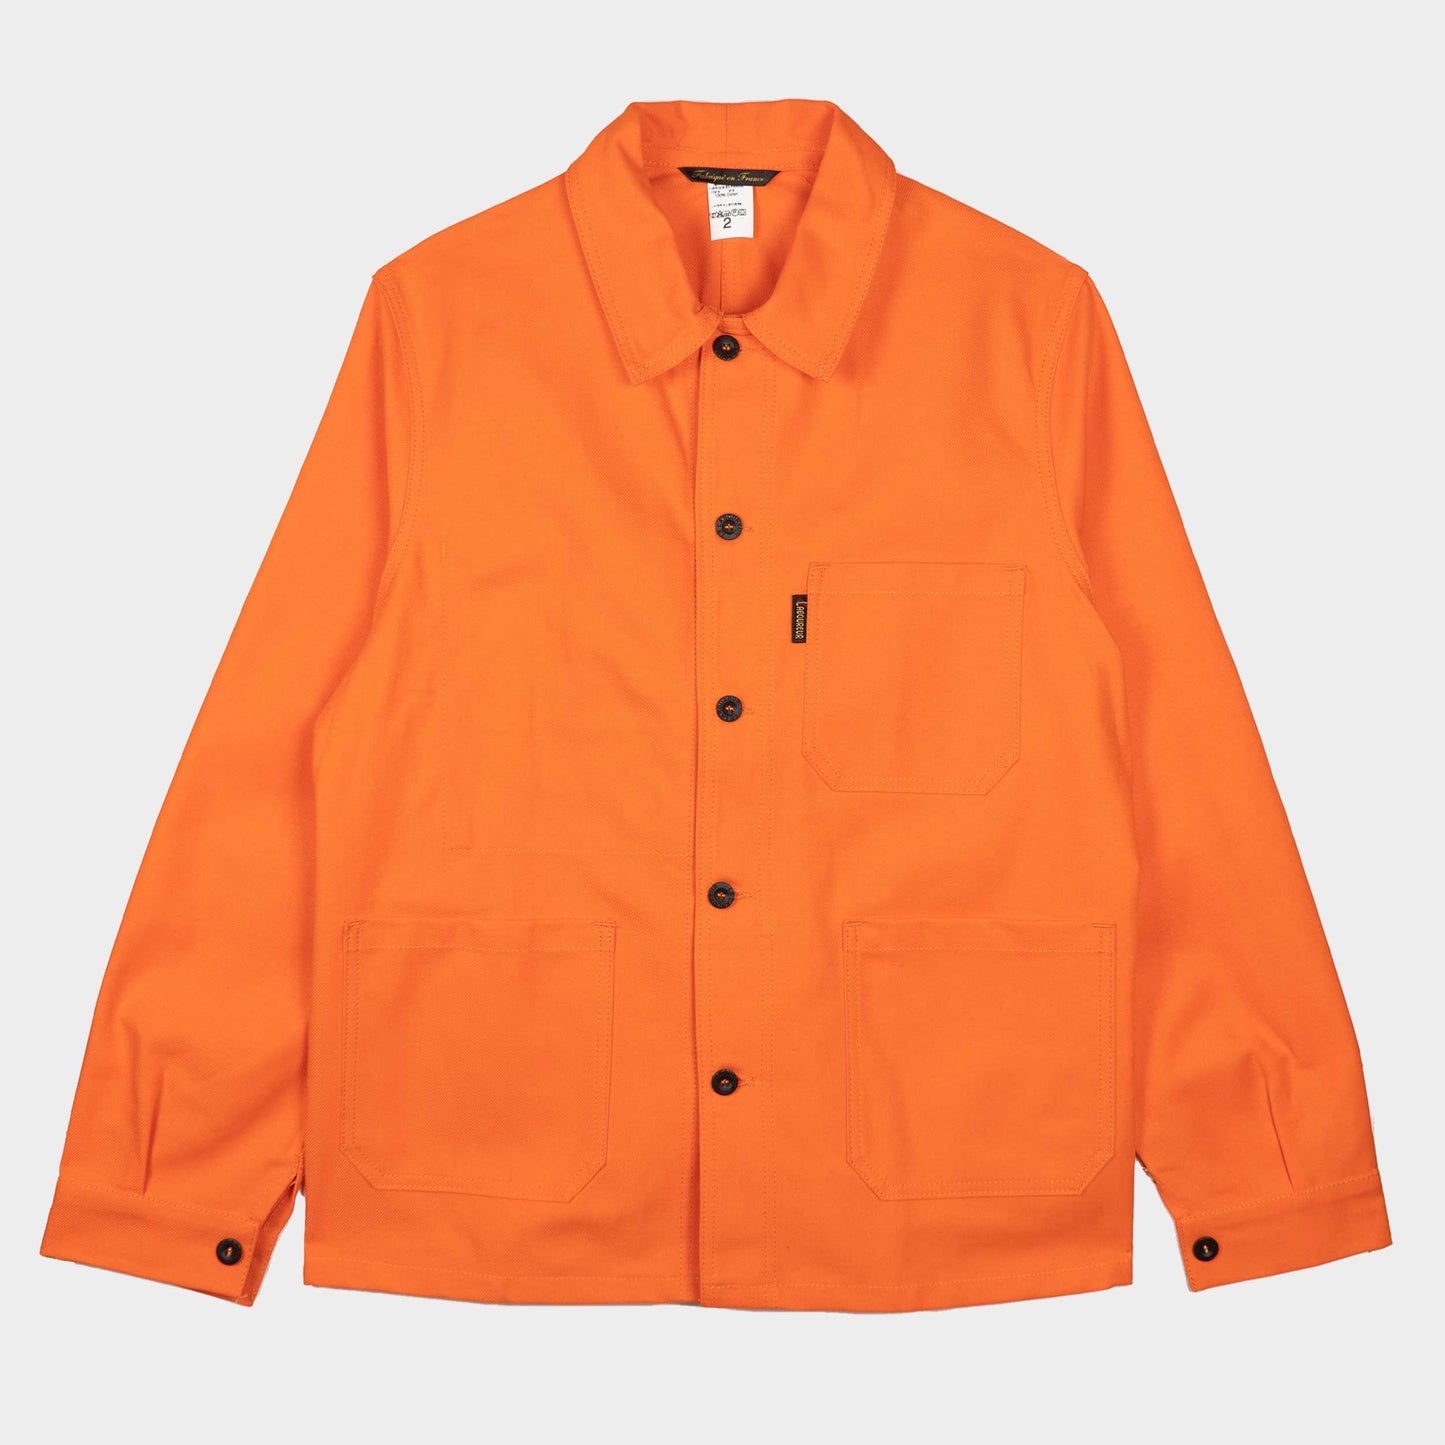 Le Laboureur French Cotton Work Jacket in Safety Orange